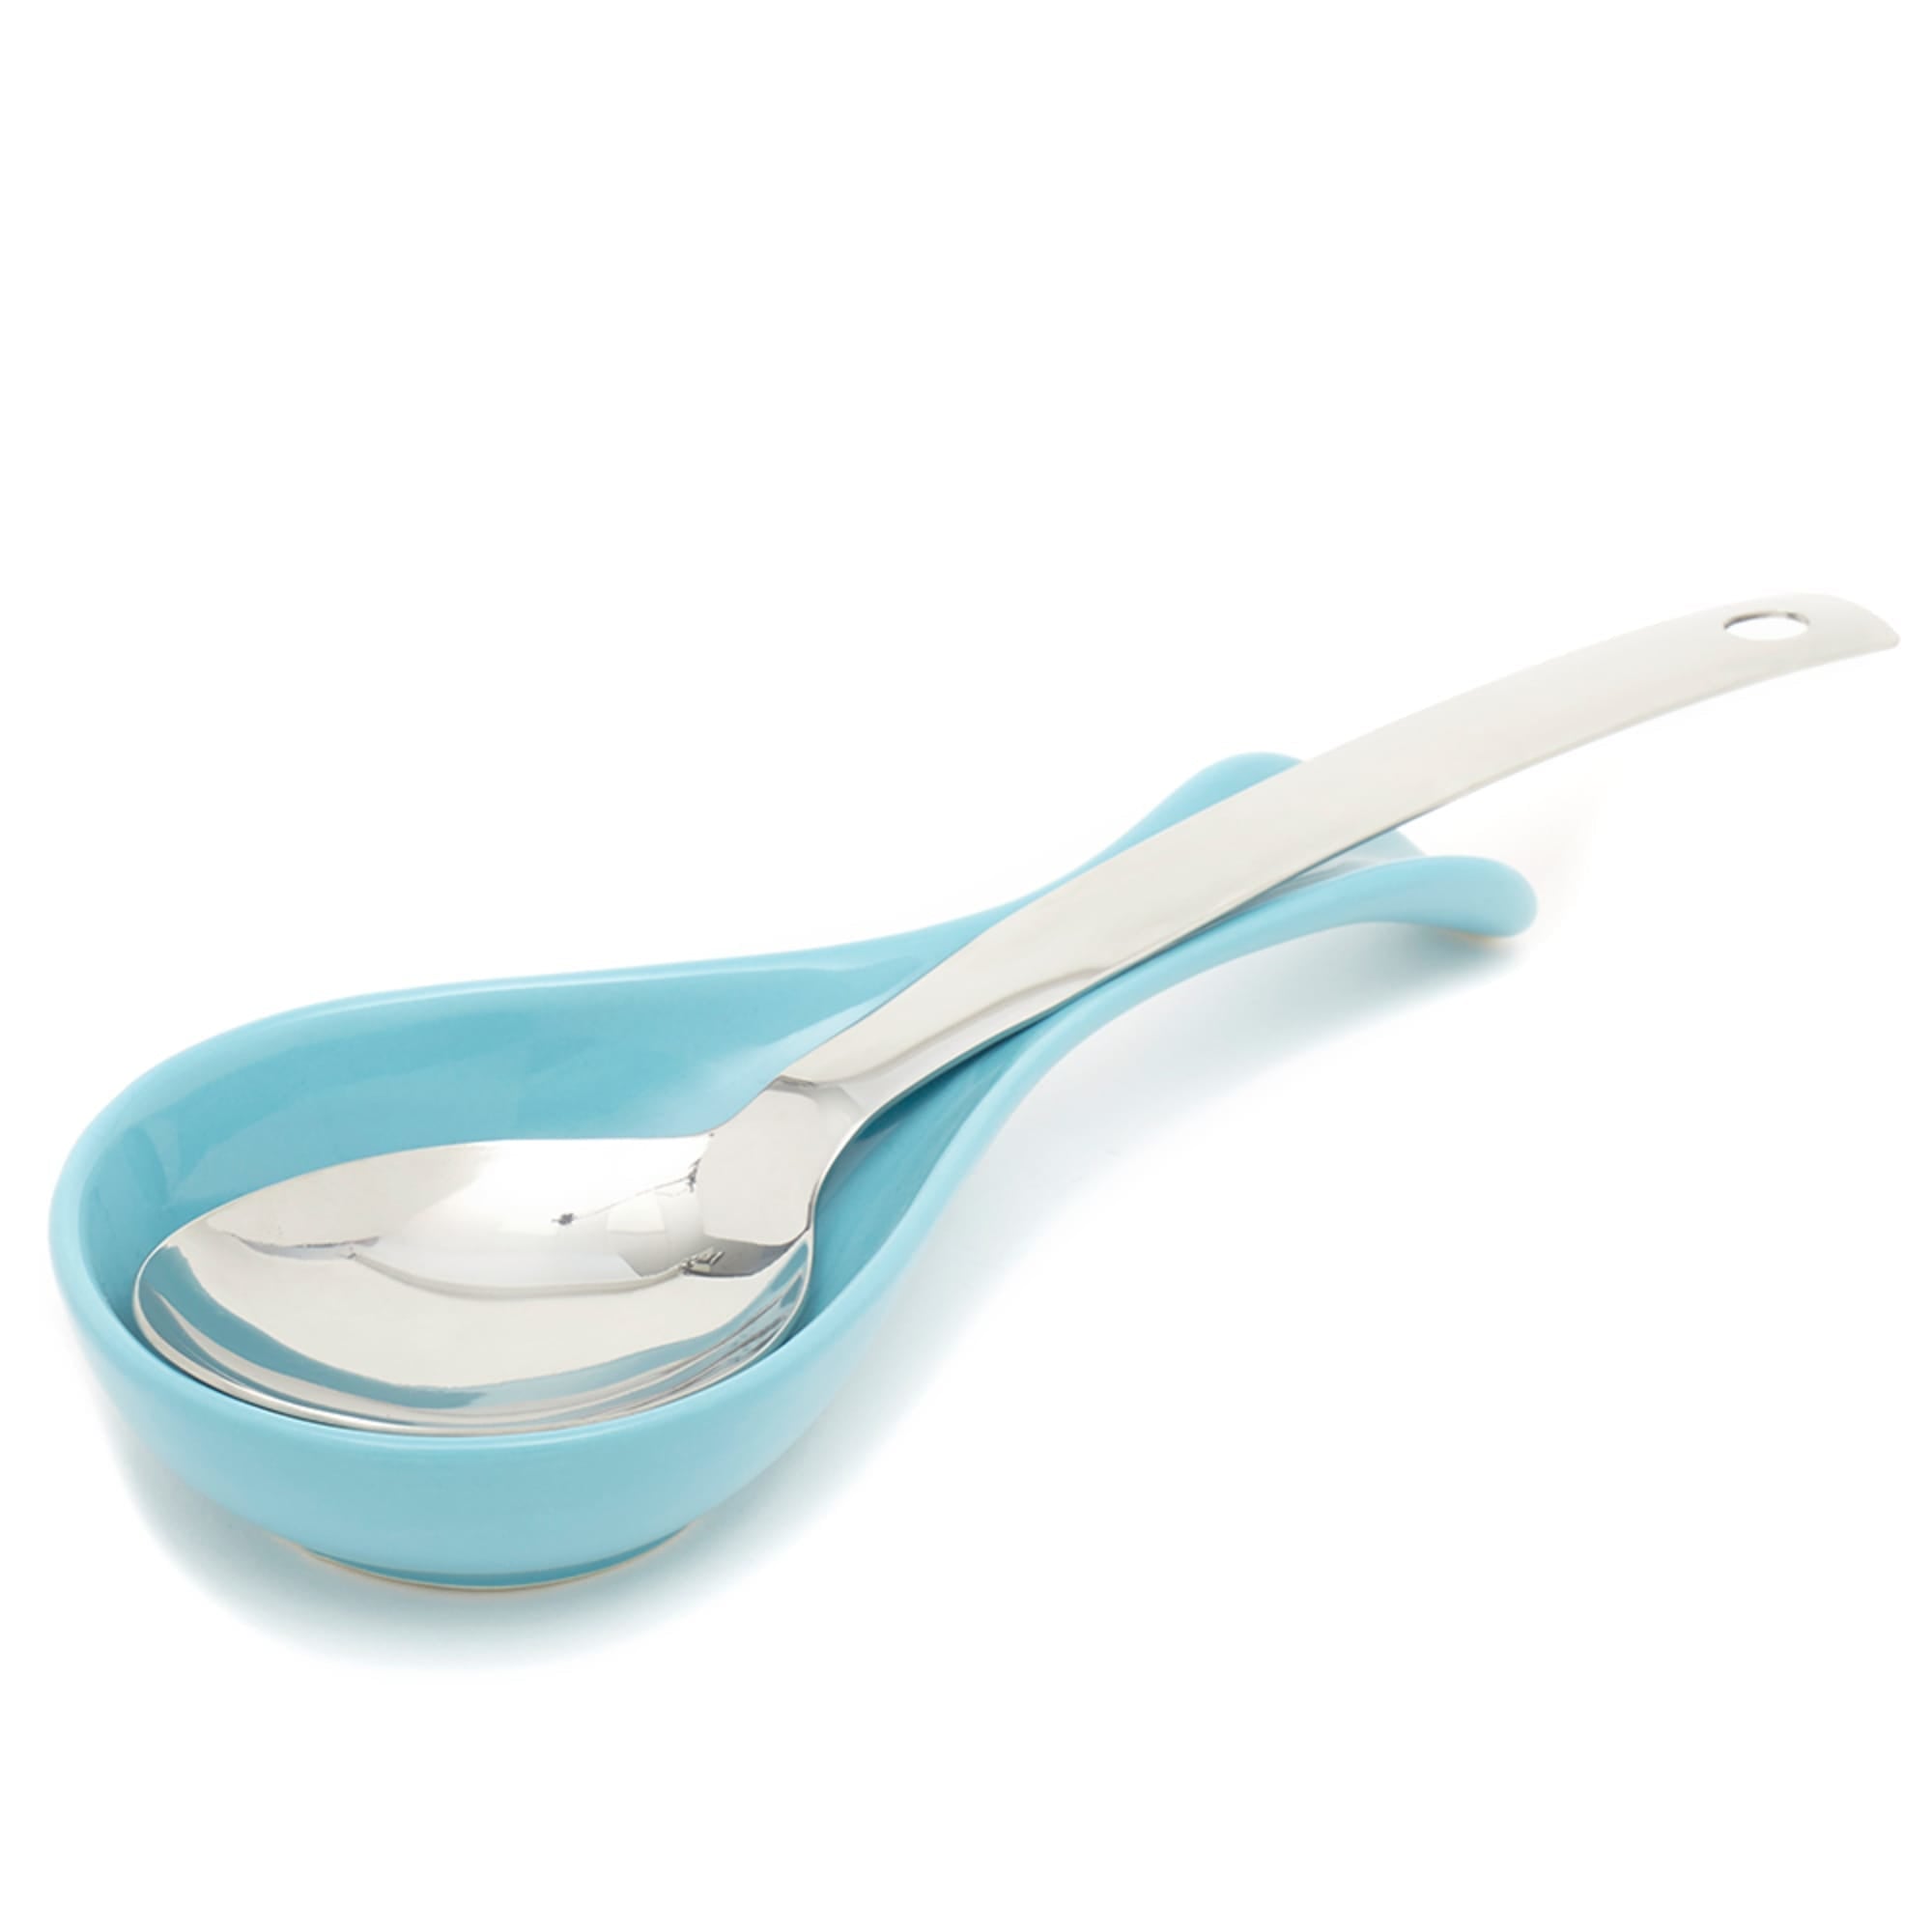 Home Basics Stainless Steel Aster Solid Spoon $2.00 EACH, CASE PACK OF 24